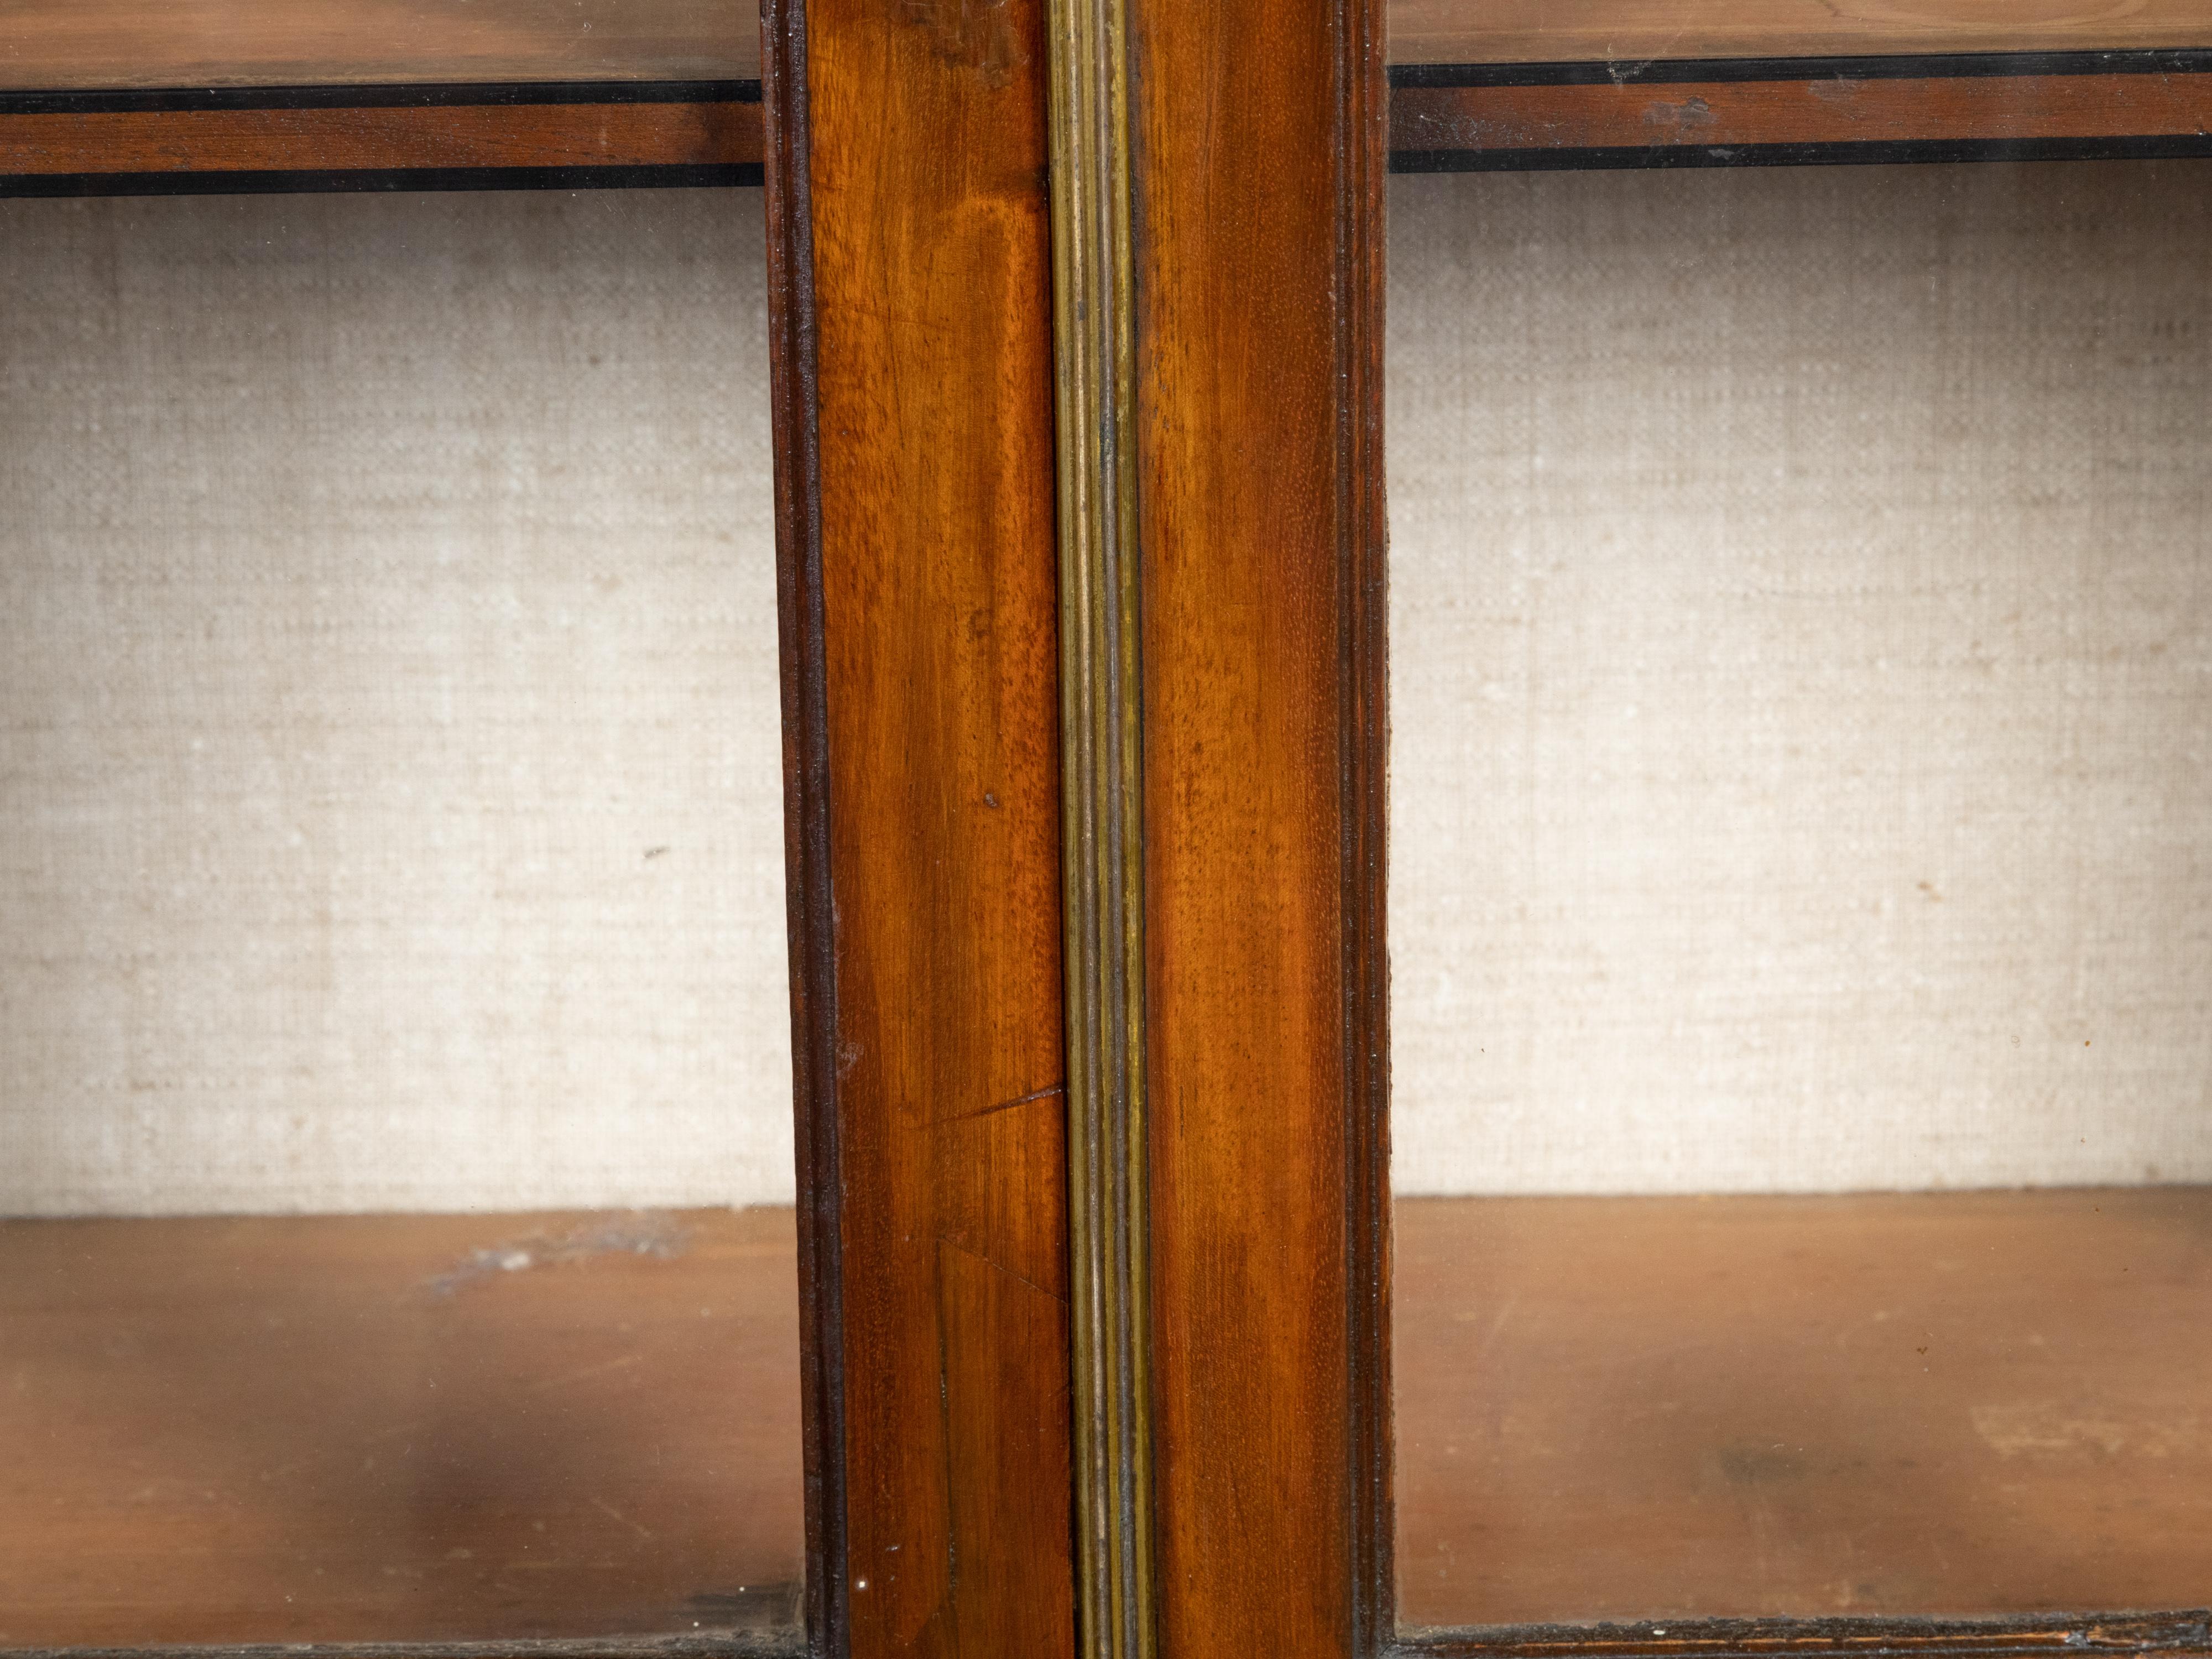 English 1840s Mahogany Veneered Vitrine Cabinet with Glass Doors and Drawers For Sale 2